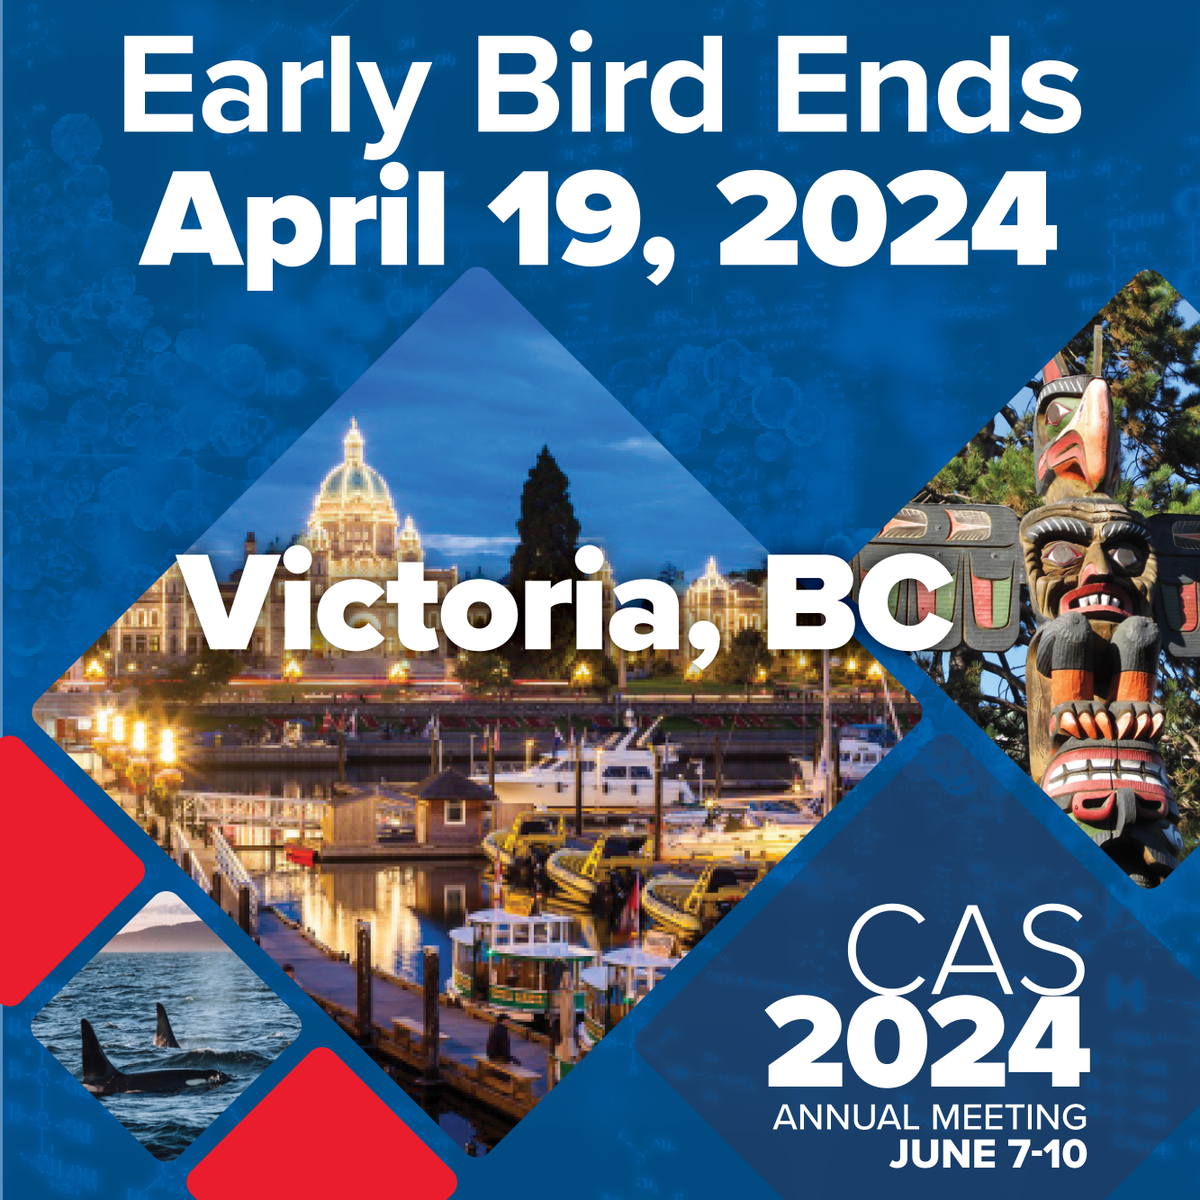 Reminder! #CASAM2024 Early Bird rate ends this Friday, April 19. Held June 7-10 in Victoria, BC, #CASAM2024 features interactive workshops, sessions, PBLDs, competitions, SIM Olympics, social events and more! Register today and save - cas.ca/annual-meeting #anesthesiaevents